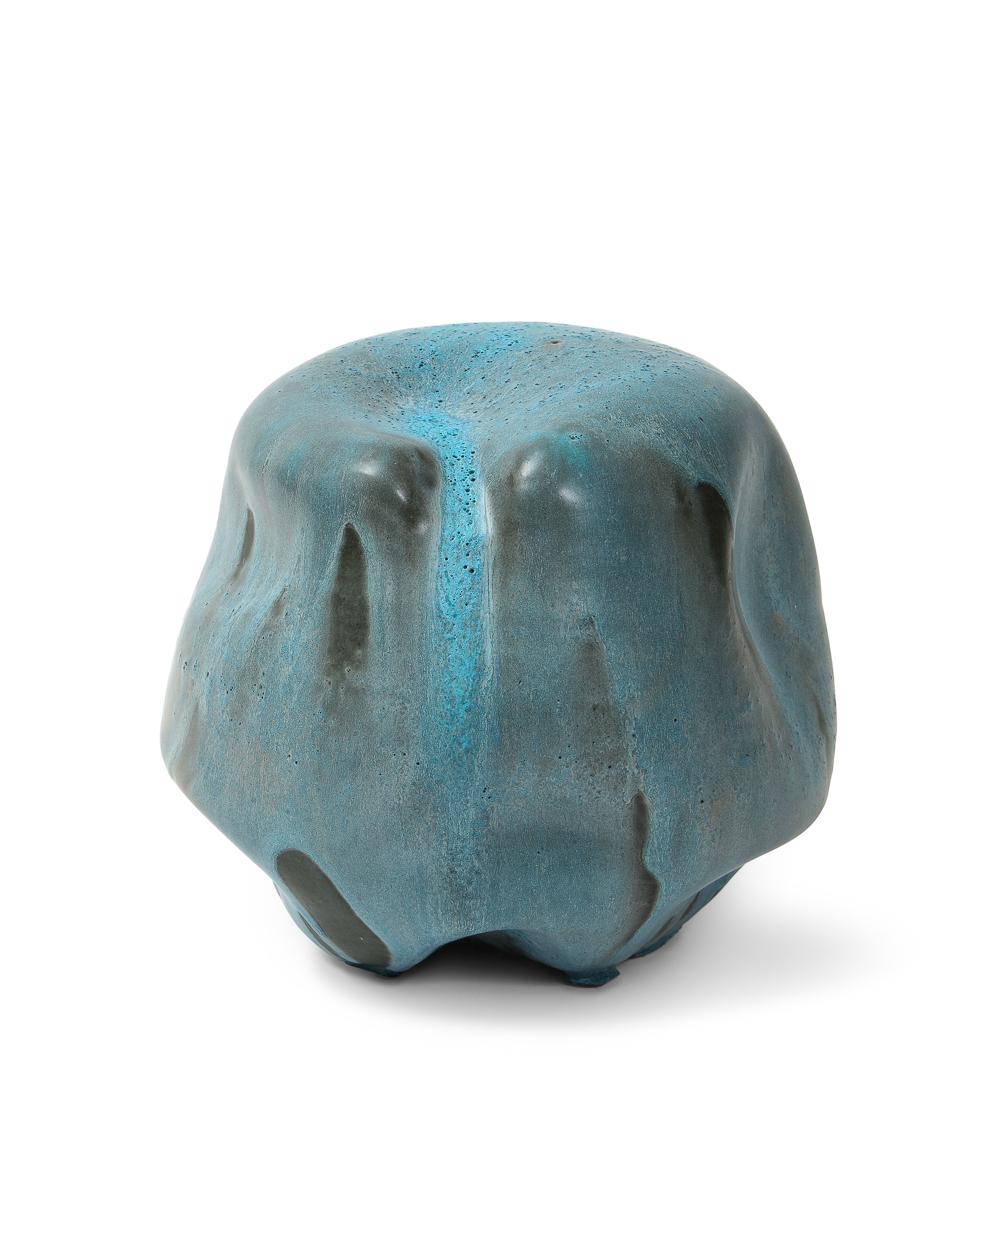 Amorphic sculpture #3 by David Haskell. Ceramic sculpture with blue glazes.